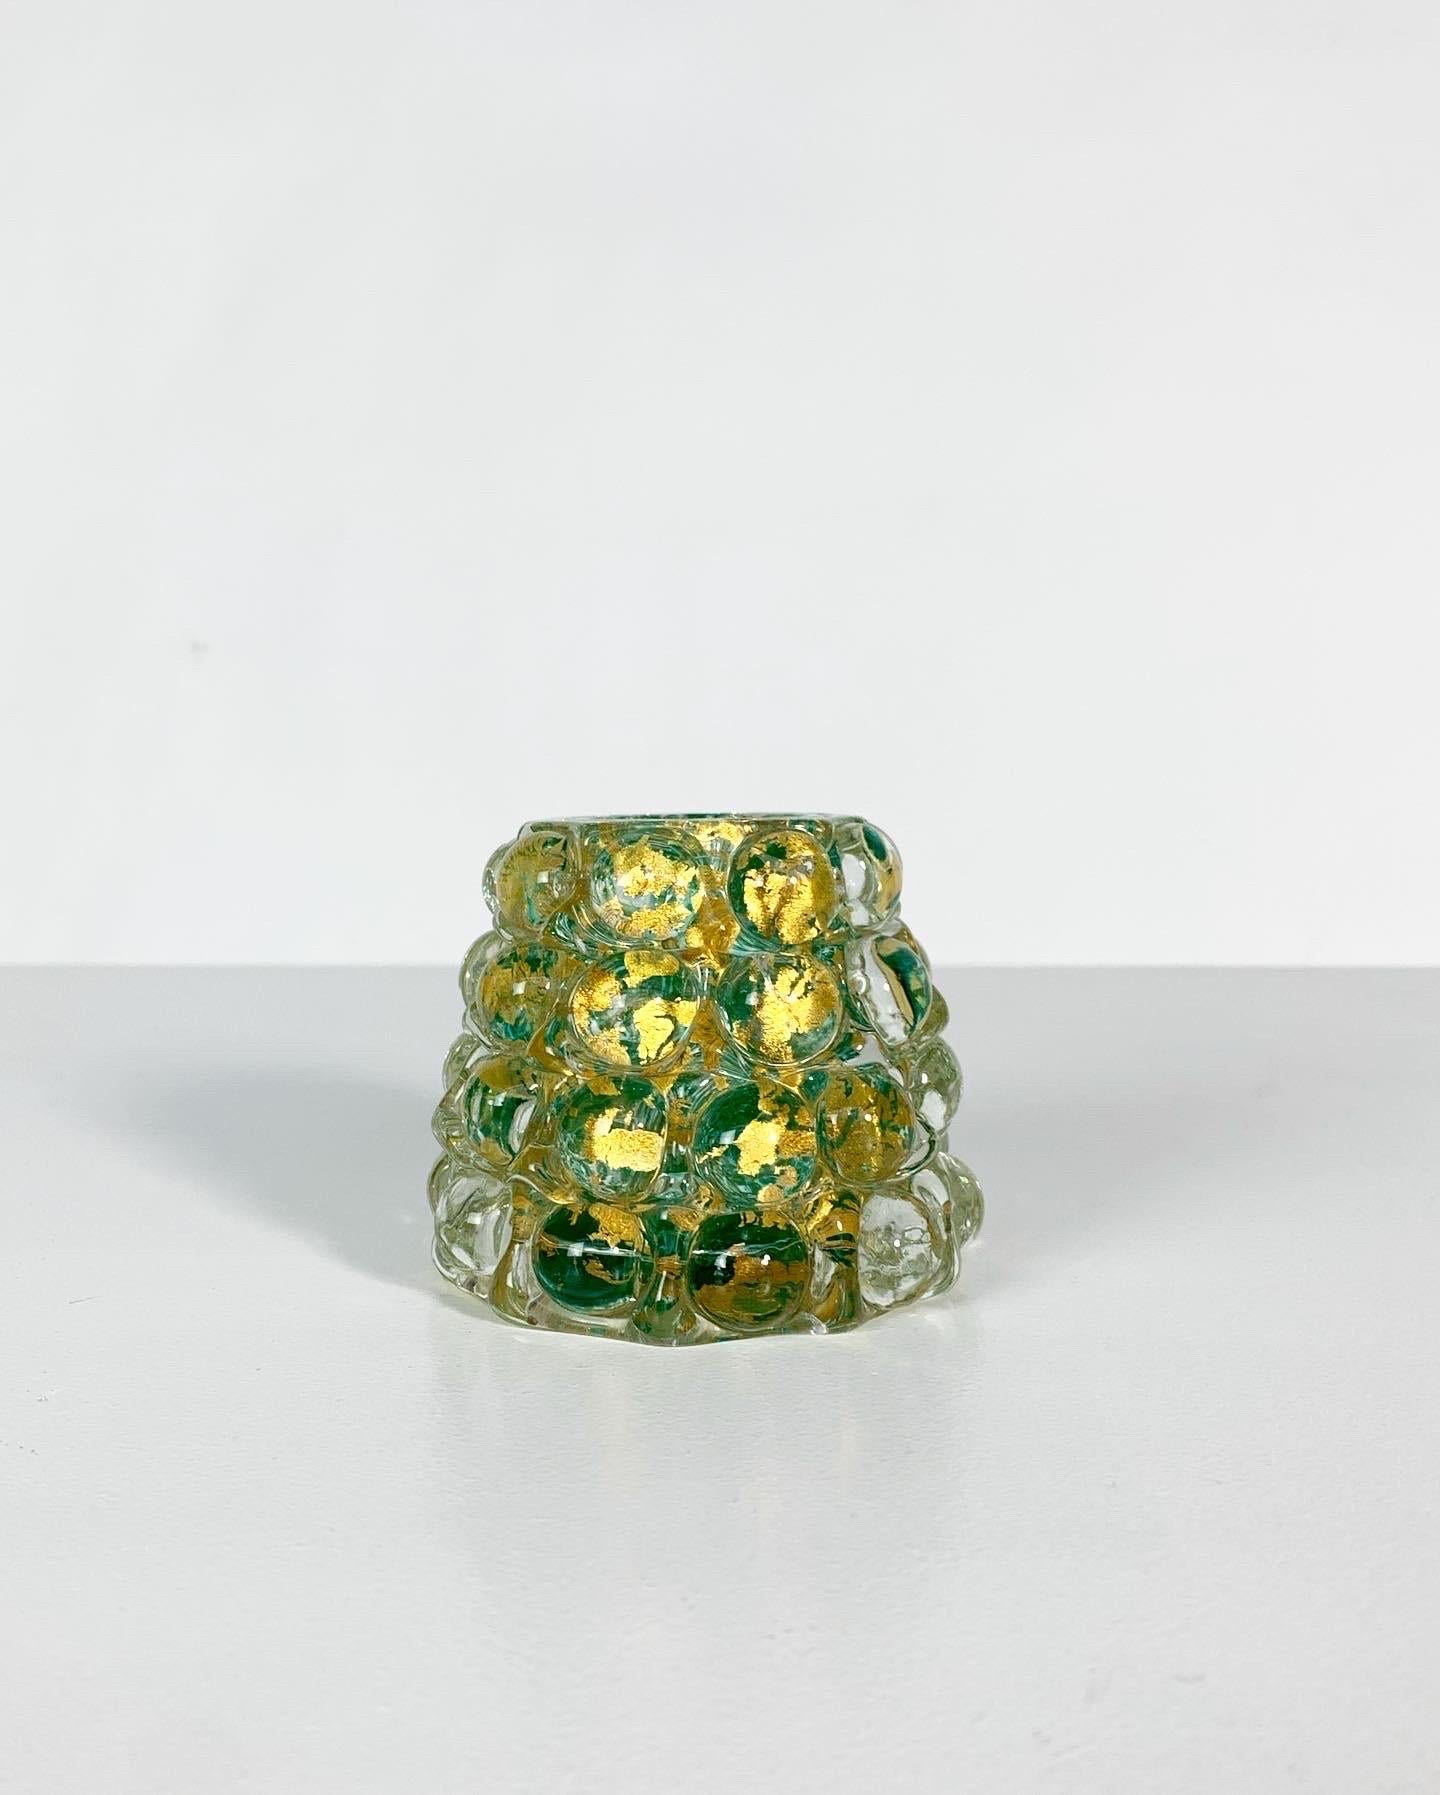 Unique and rare miniature ‚Lenti‘ vase by Ercole Barovier for Barovier & Toso, 1940s. 
Thick glass with a layer of green and gold inclusions. 

The series consisted of various shapes and colors, it‘s one of the most sought-after models by